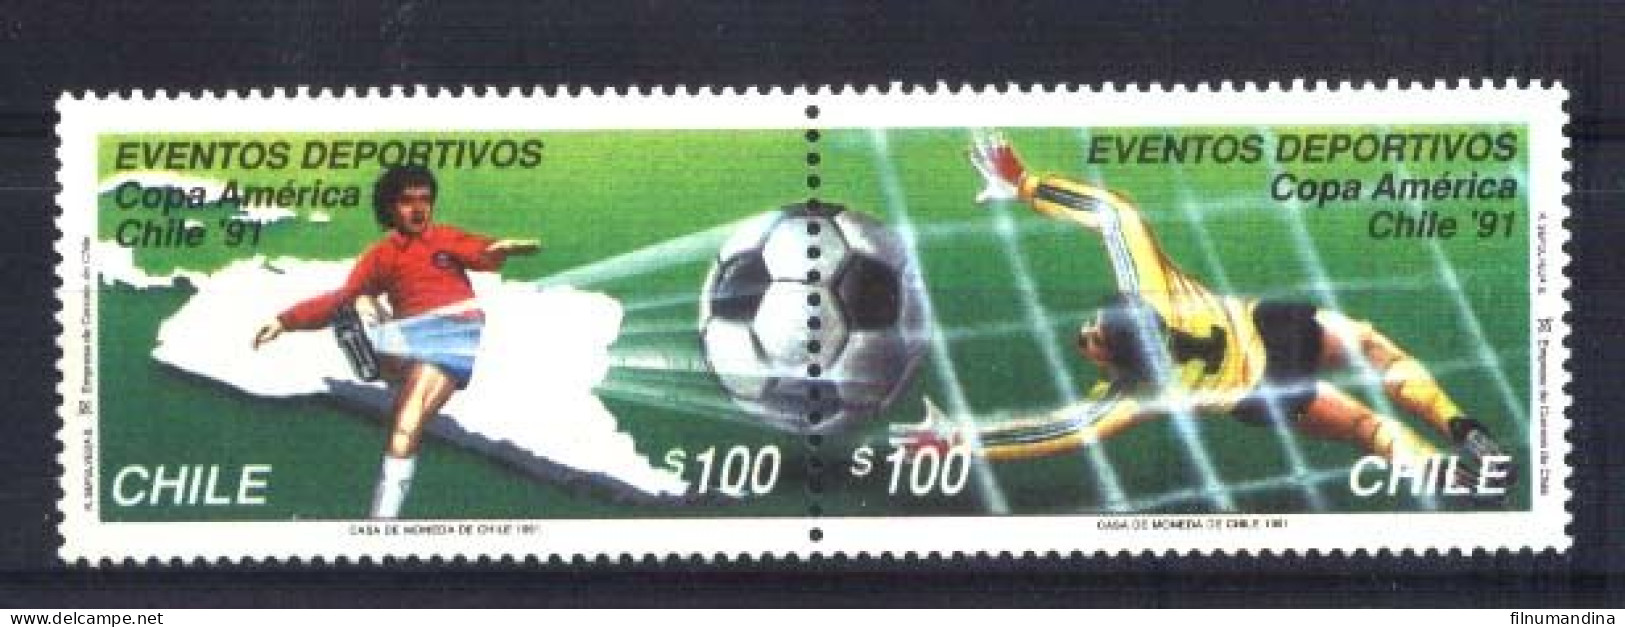 #2599 CHILE 1991 FOOTBALL FUTBOL SOCCER AMERICA CUP YV 1028-9 PAIR MNH - Soccer American Cup